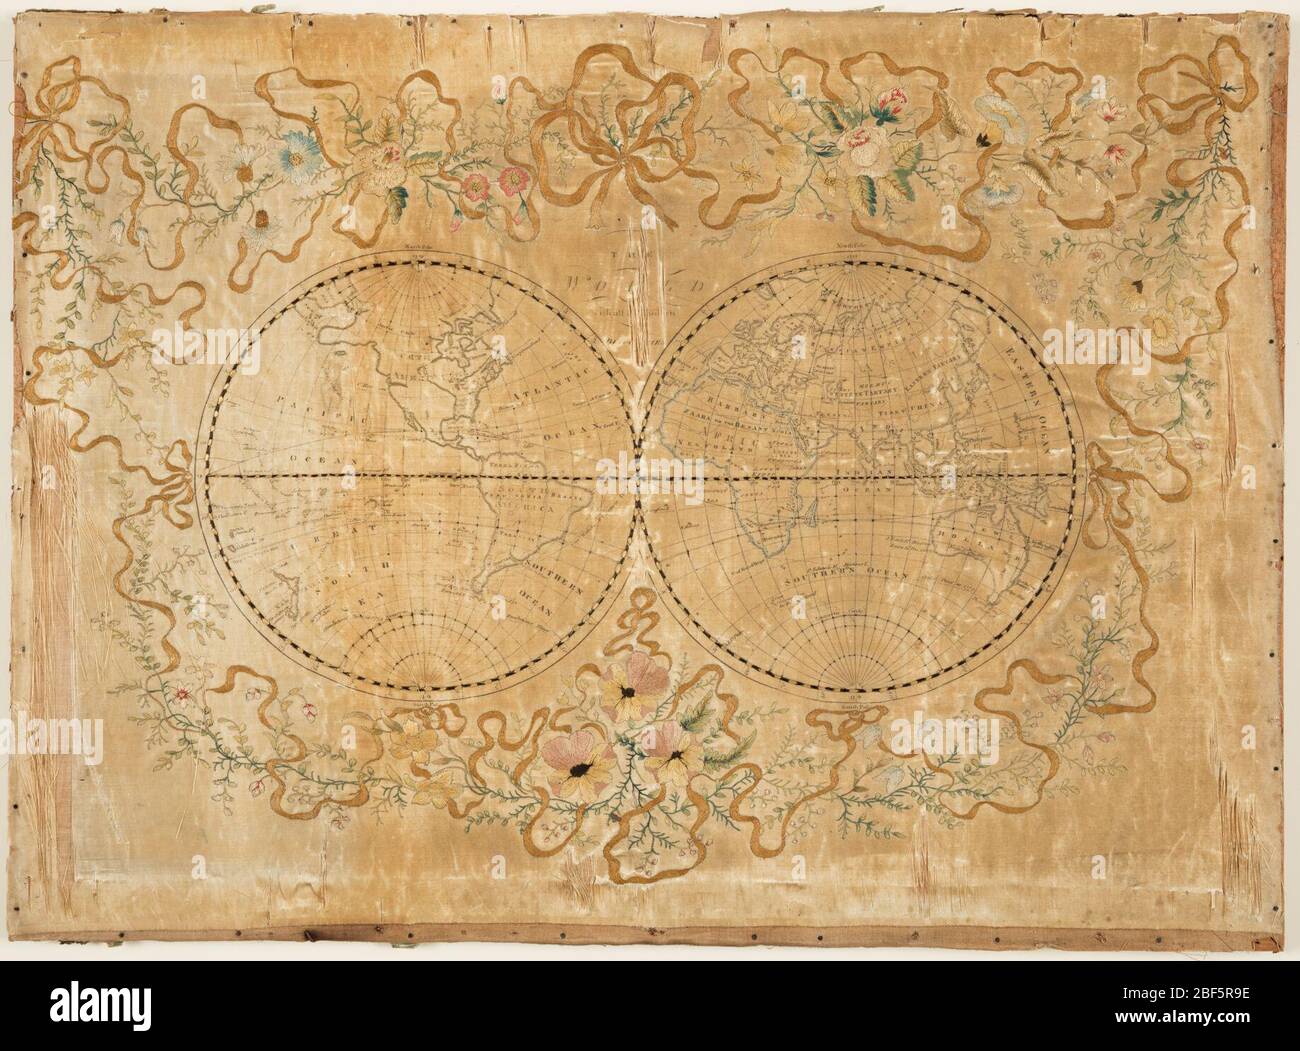 Map sampler. Embroidery on top of printed satin foundation of two globes of the world. Printing on satin reads: 'The World with all modern boundaries.' Elaborate border of embroidered flowers and ribbons. Stock Photo